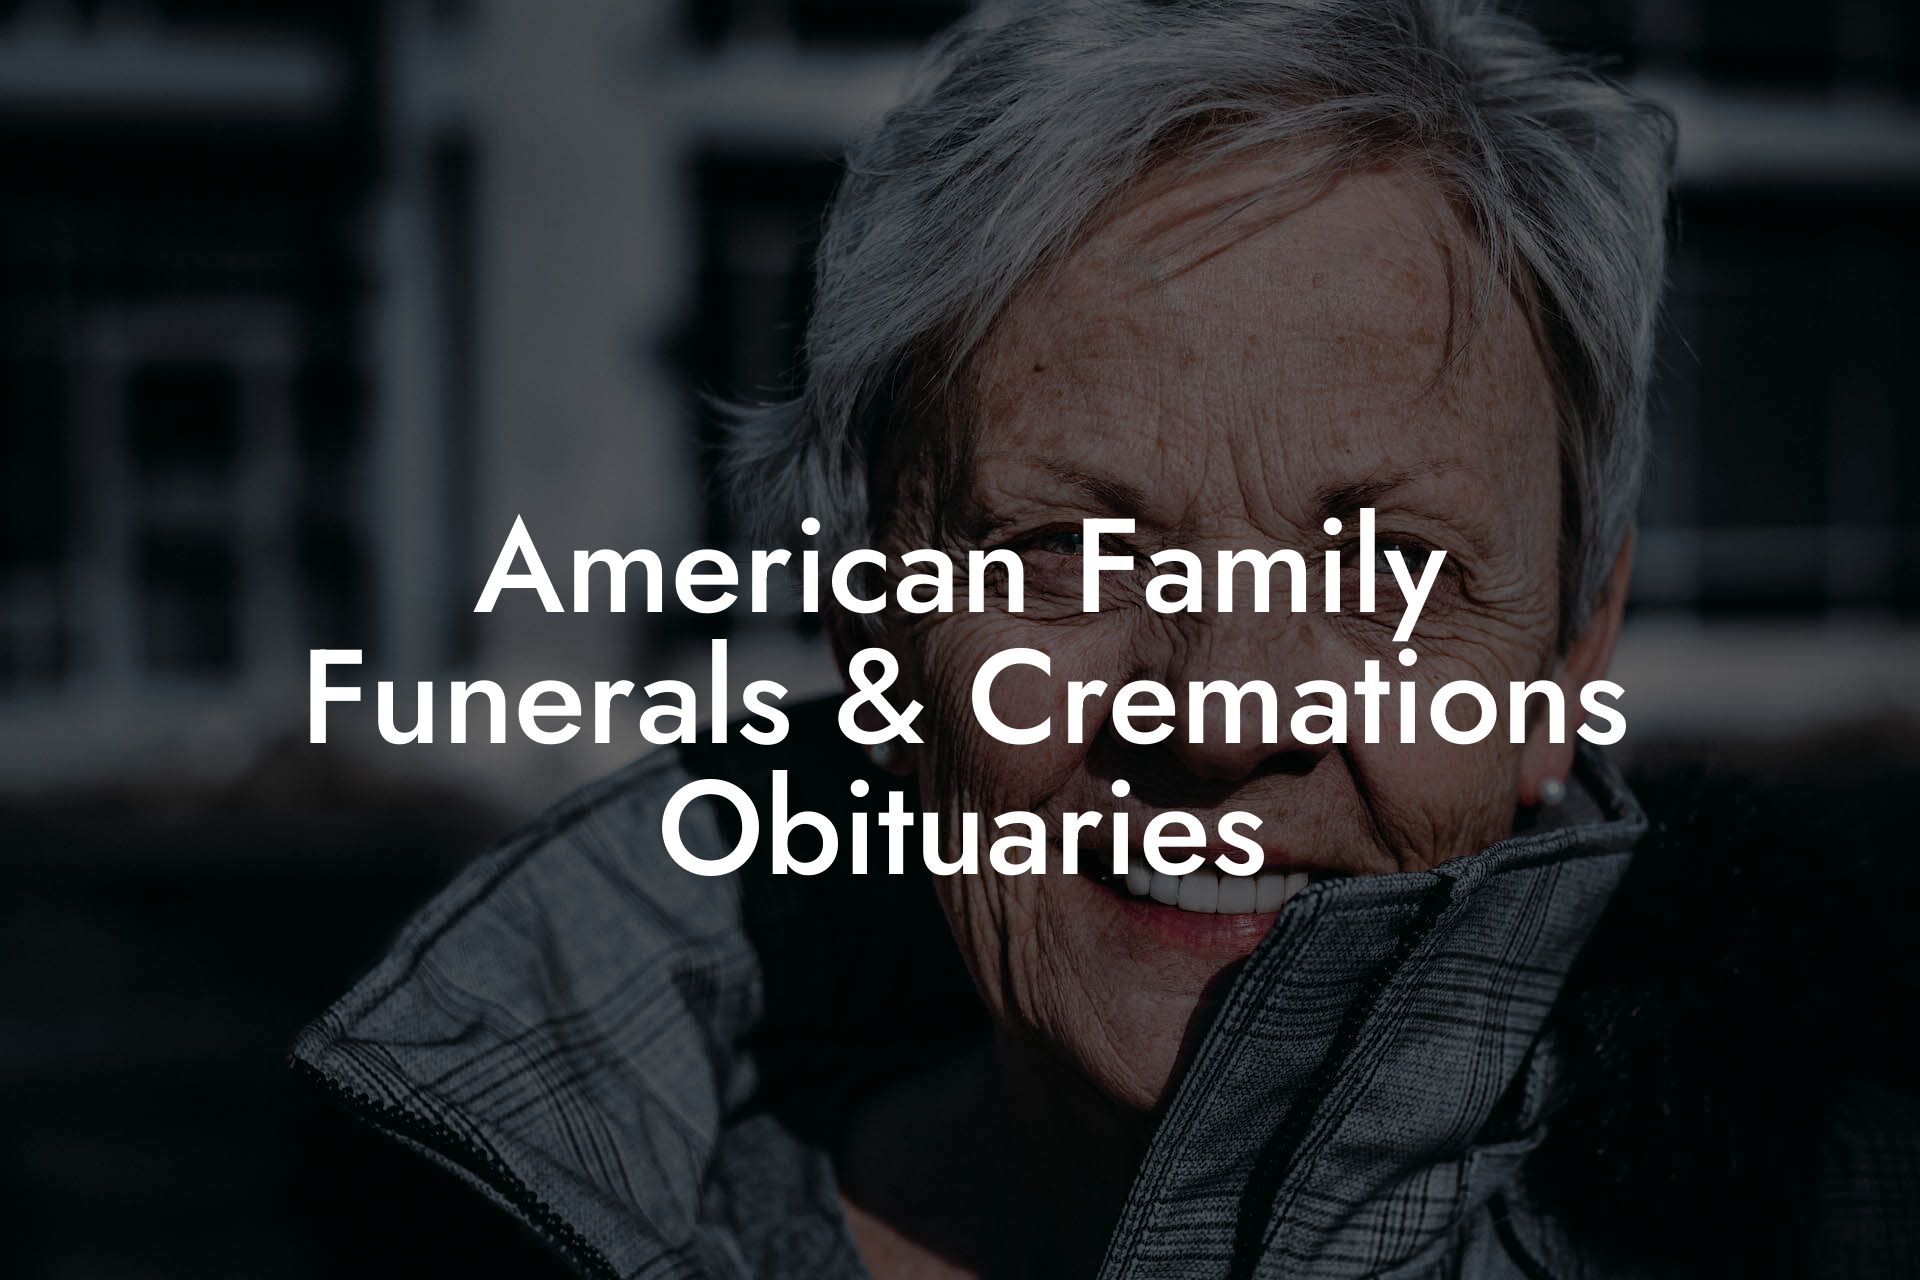 American Family Funerals & Cremations Obituaries